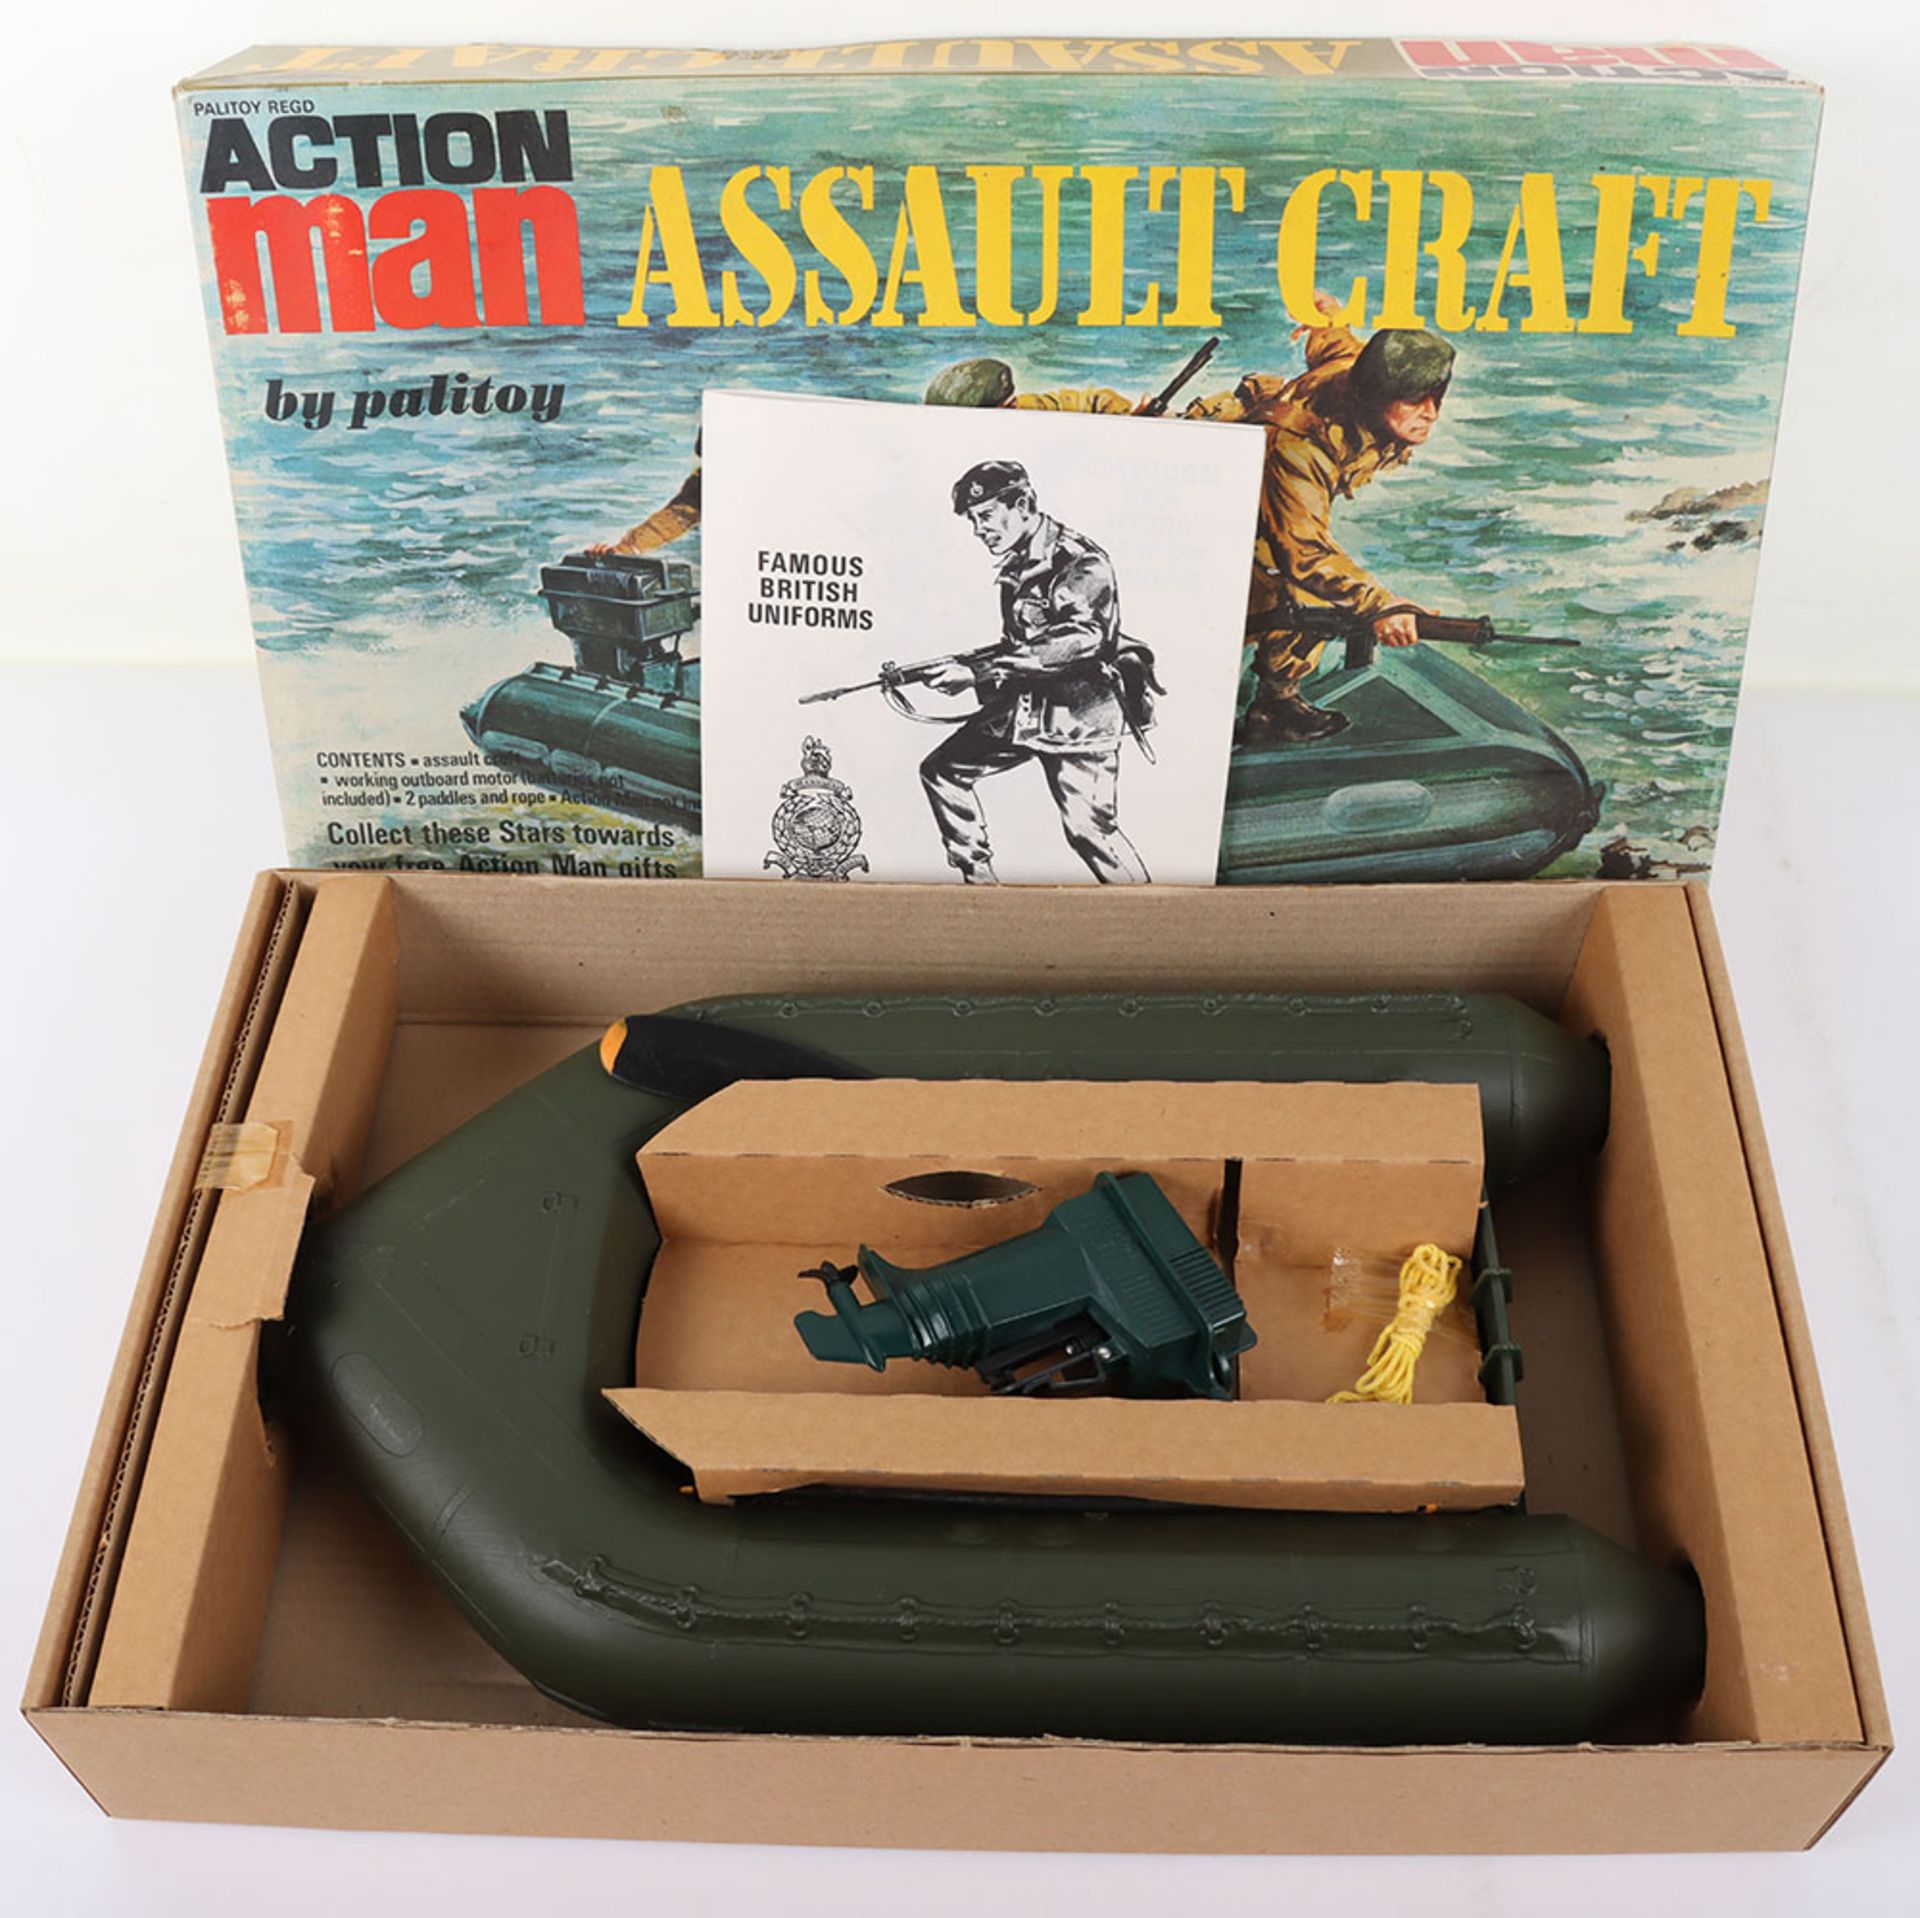 Scarce Palitoy Action Man Trade Box of Assault Crafts - Image 4 of 8